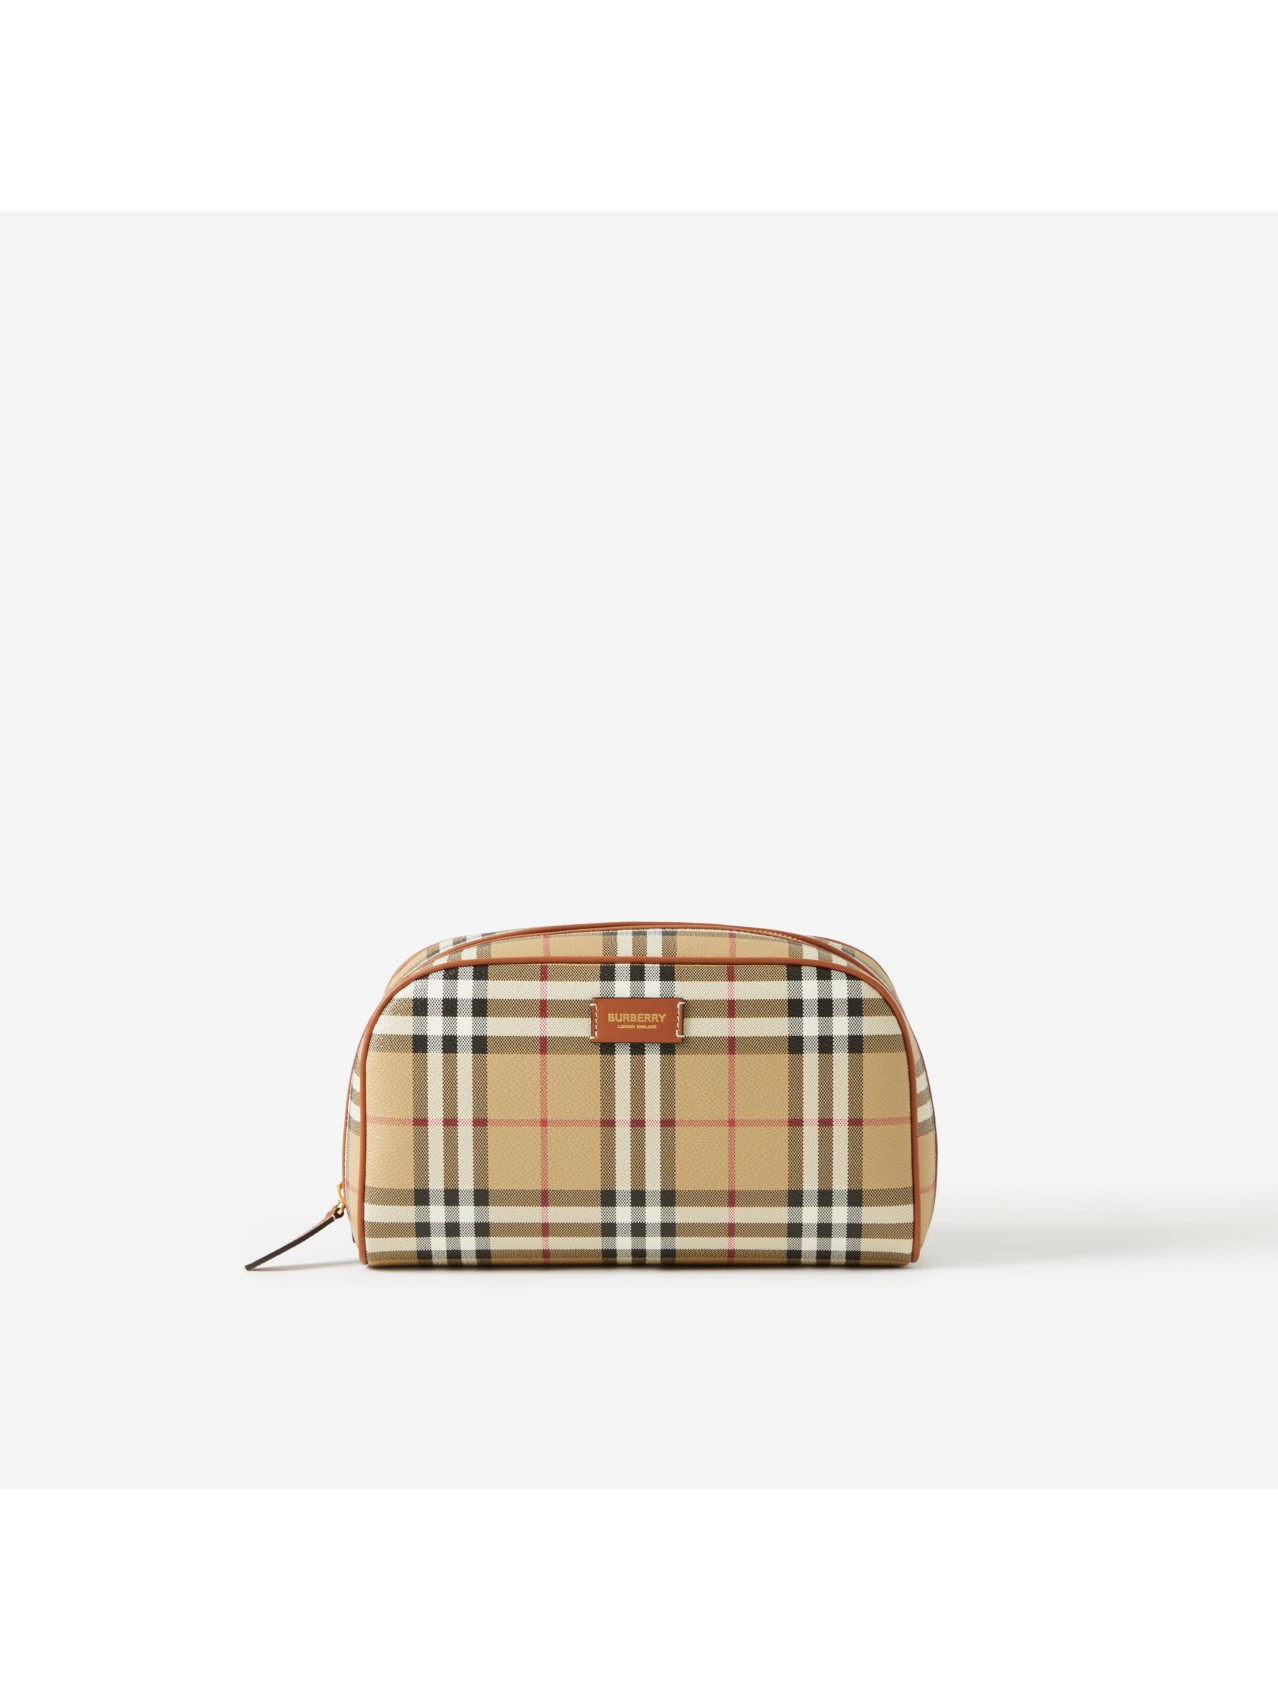 Women's Wallets | Women's Small Leather Goods | Burberry® Official